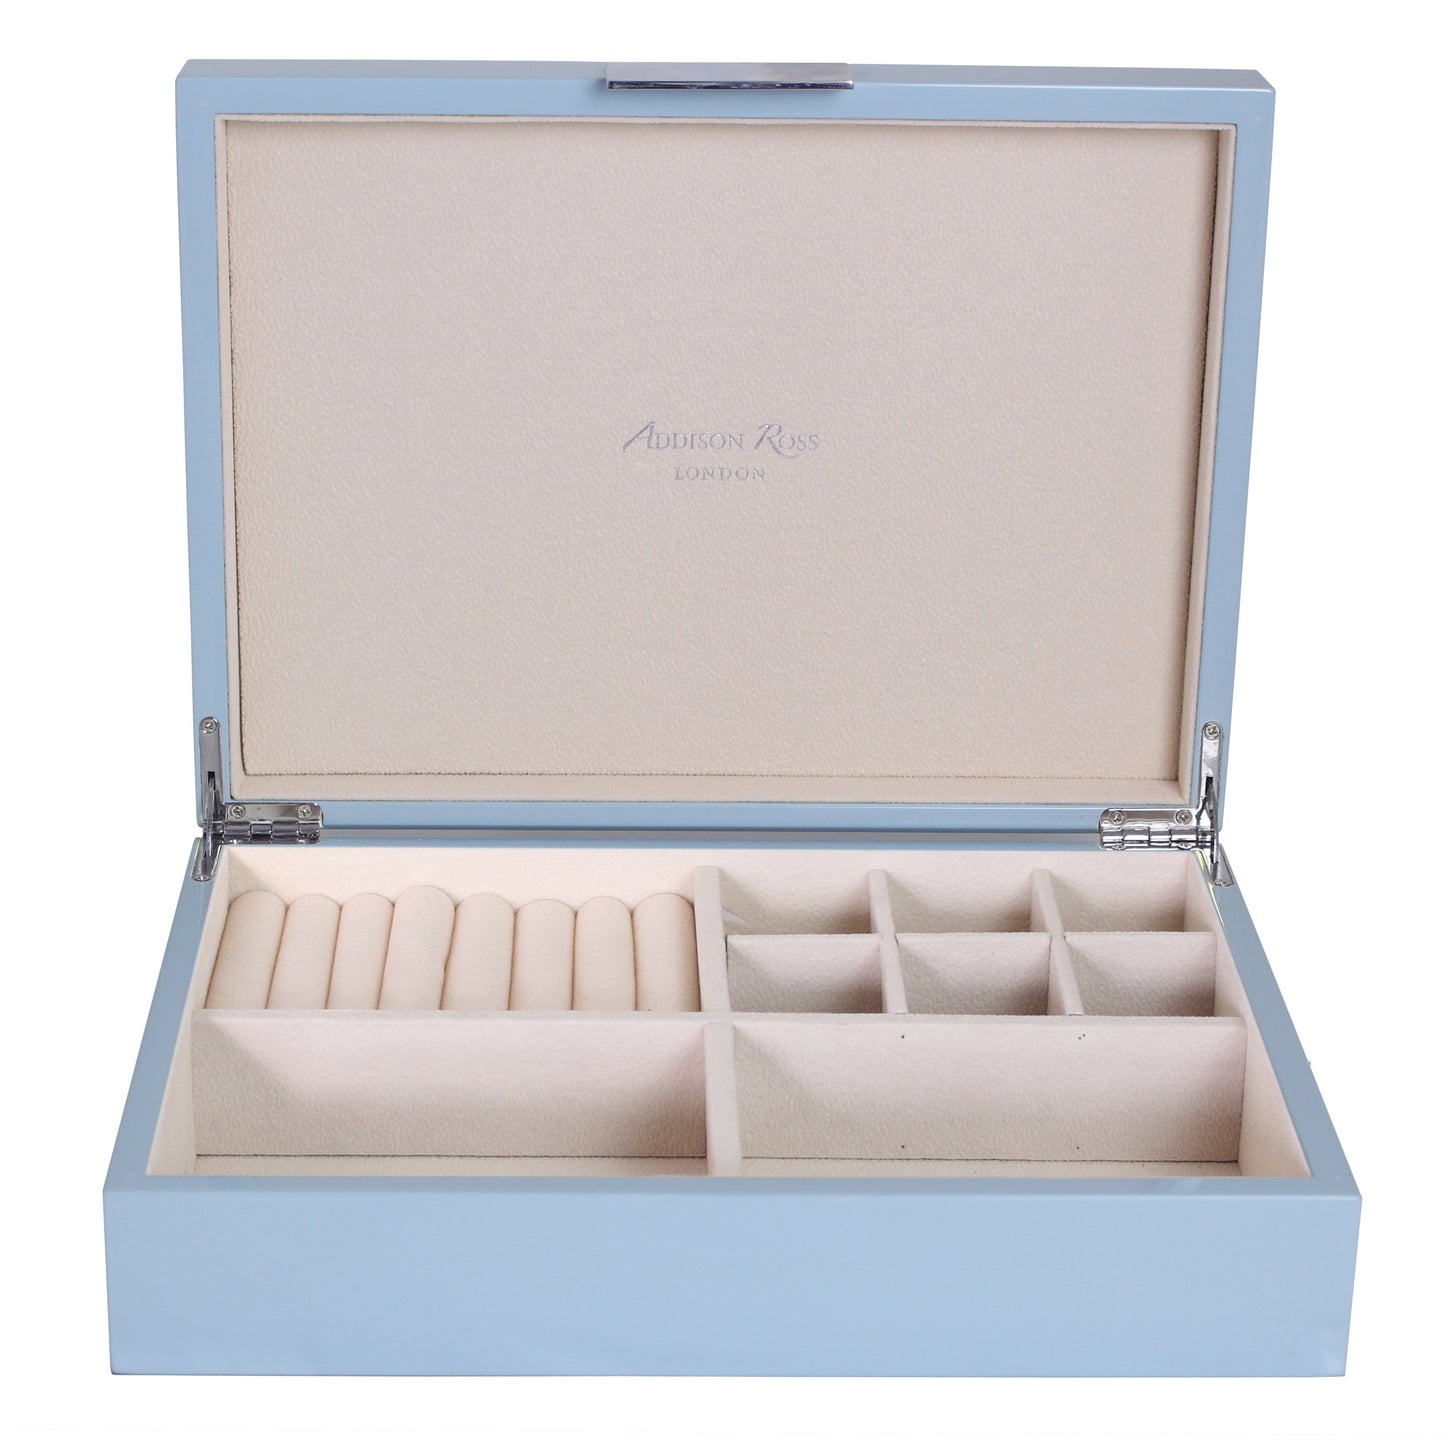 Large pale blue jewelry box with suede interior